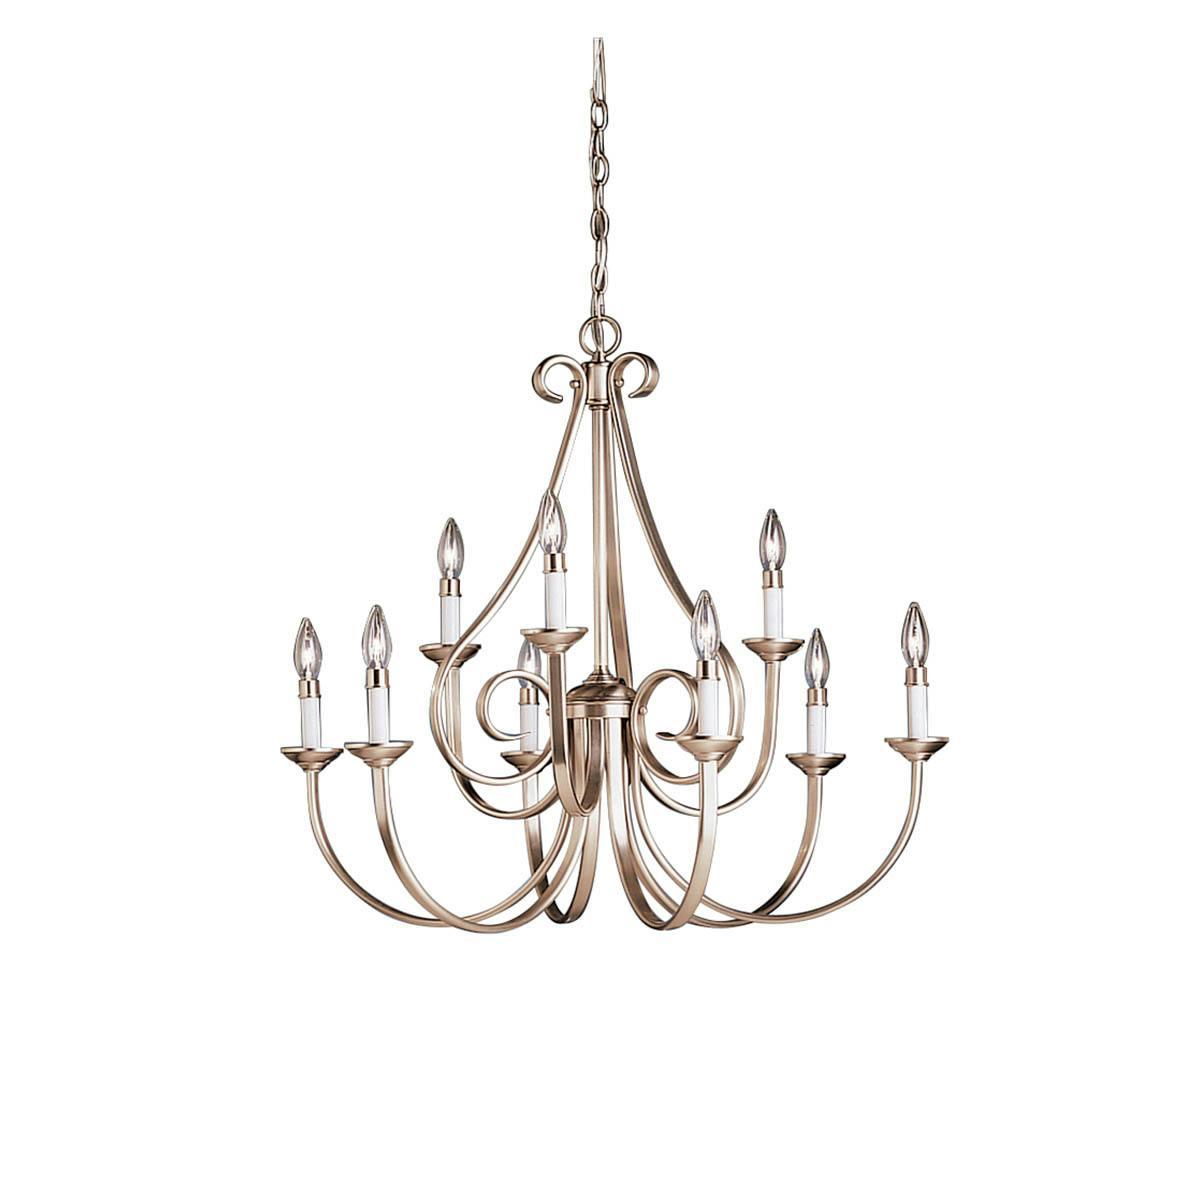 Dover 9 Light 2 Tier Chandelier Nickel on a white background